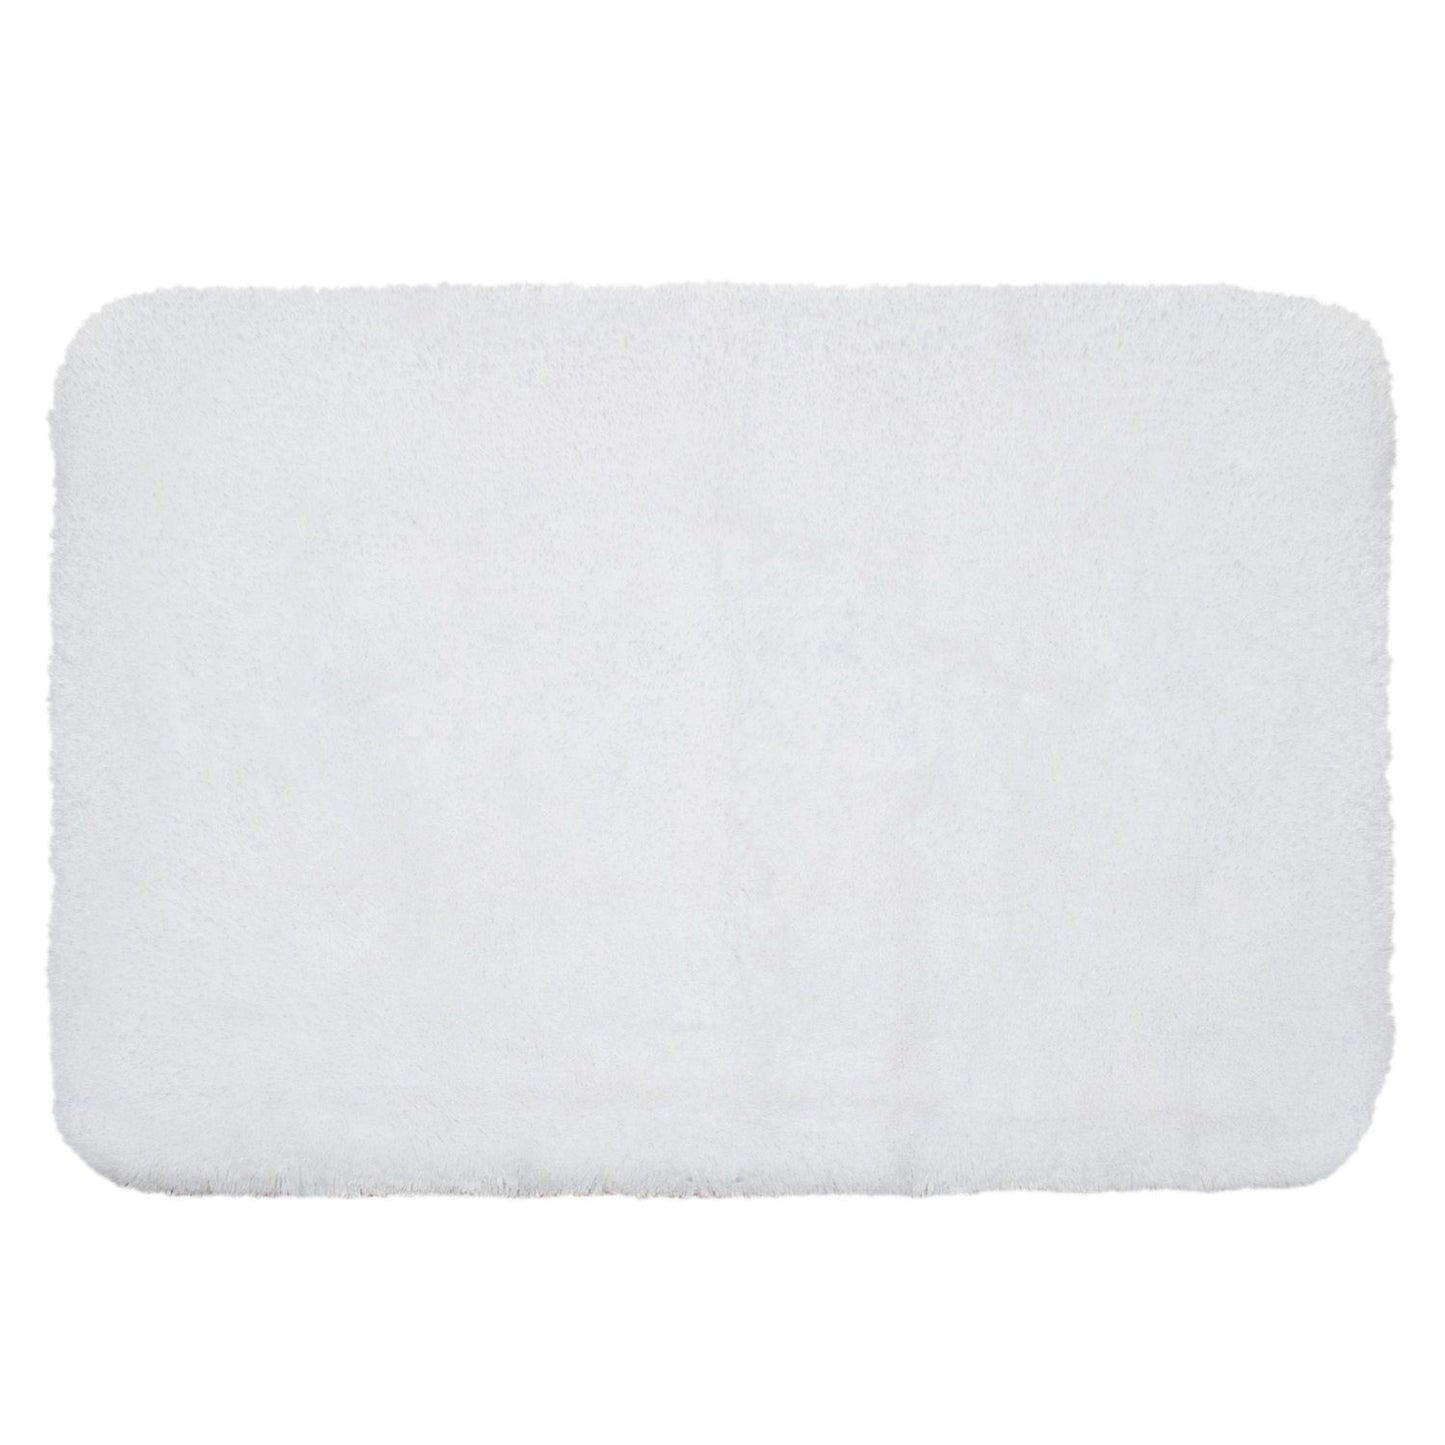 Hotel Premier Collection Bath Rug  (Assorted Colors)